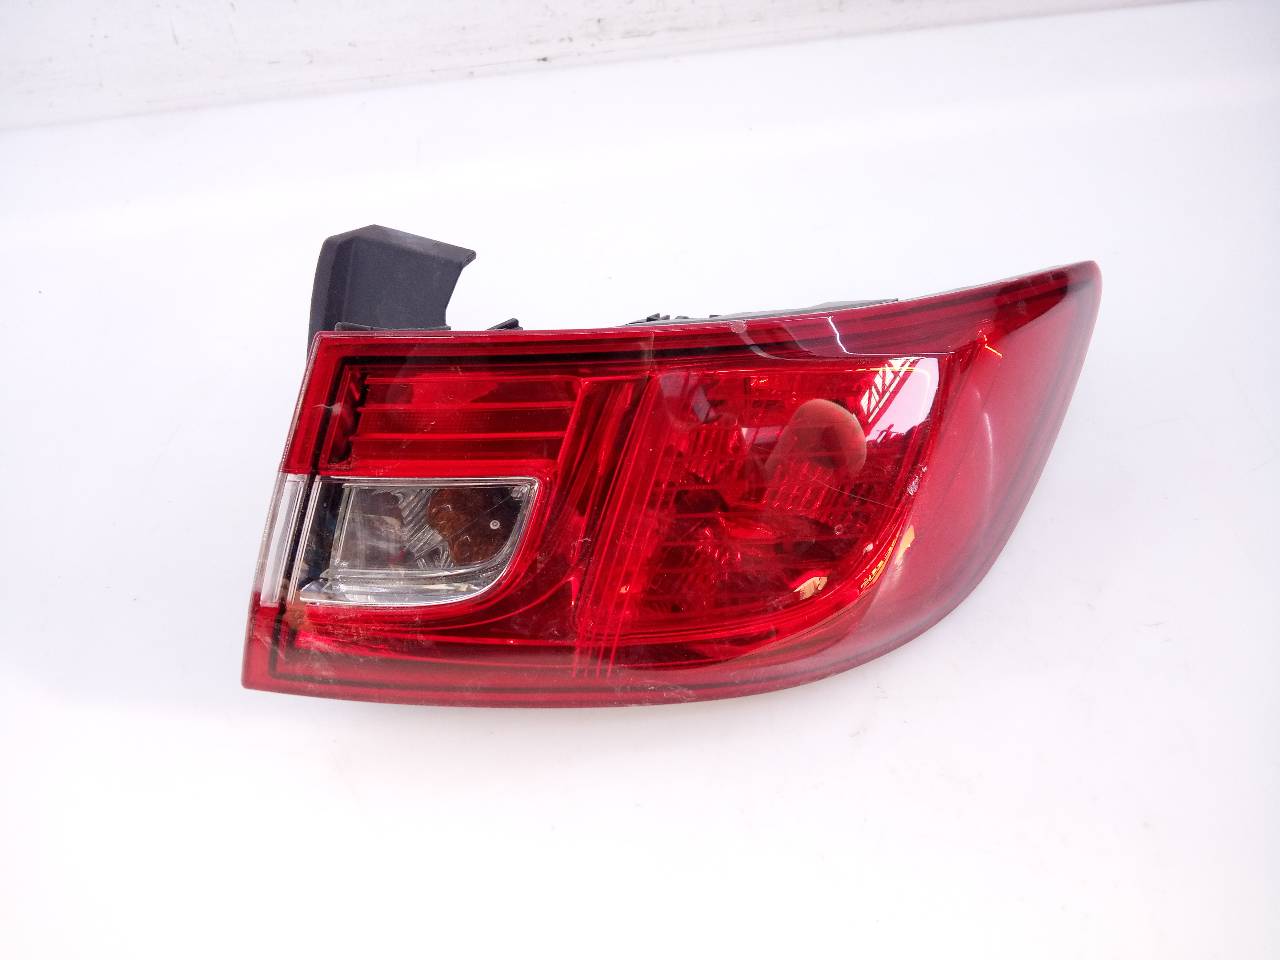 RENAULT Clio 3 generation (2005-2012) Rear Right Taillight Lamp 265509846R, E1-A1-35-2 21828513